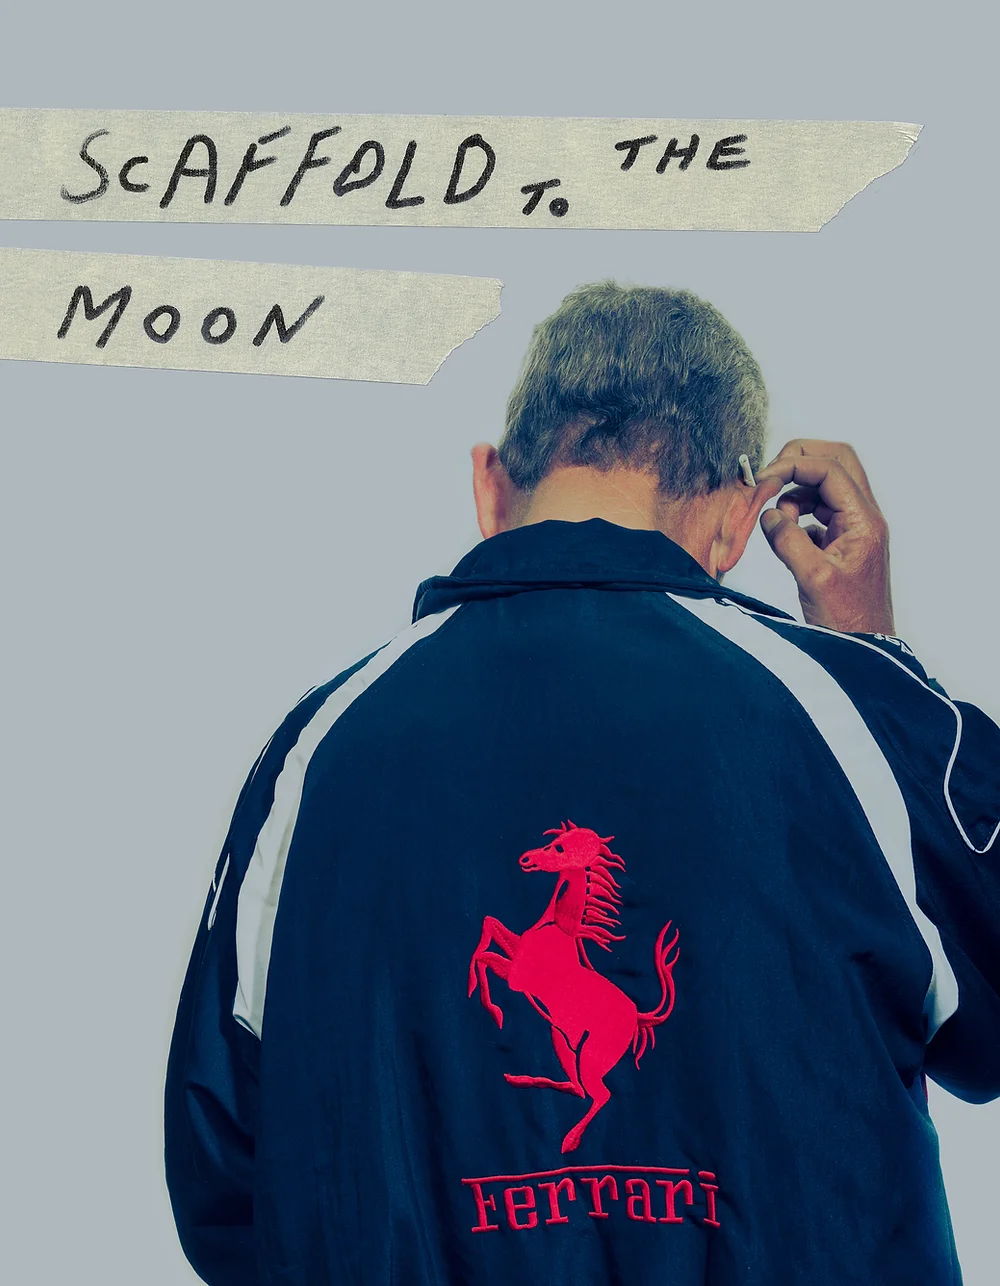 Scaffold to the Moon by Huw Alden Davies